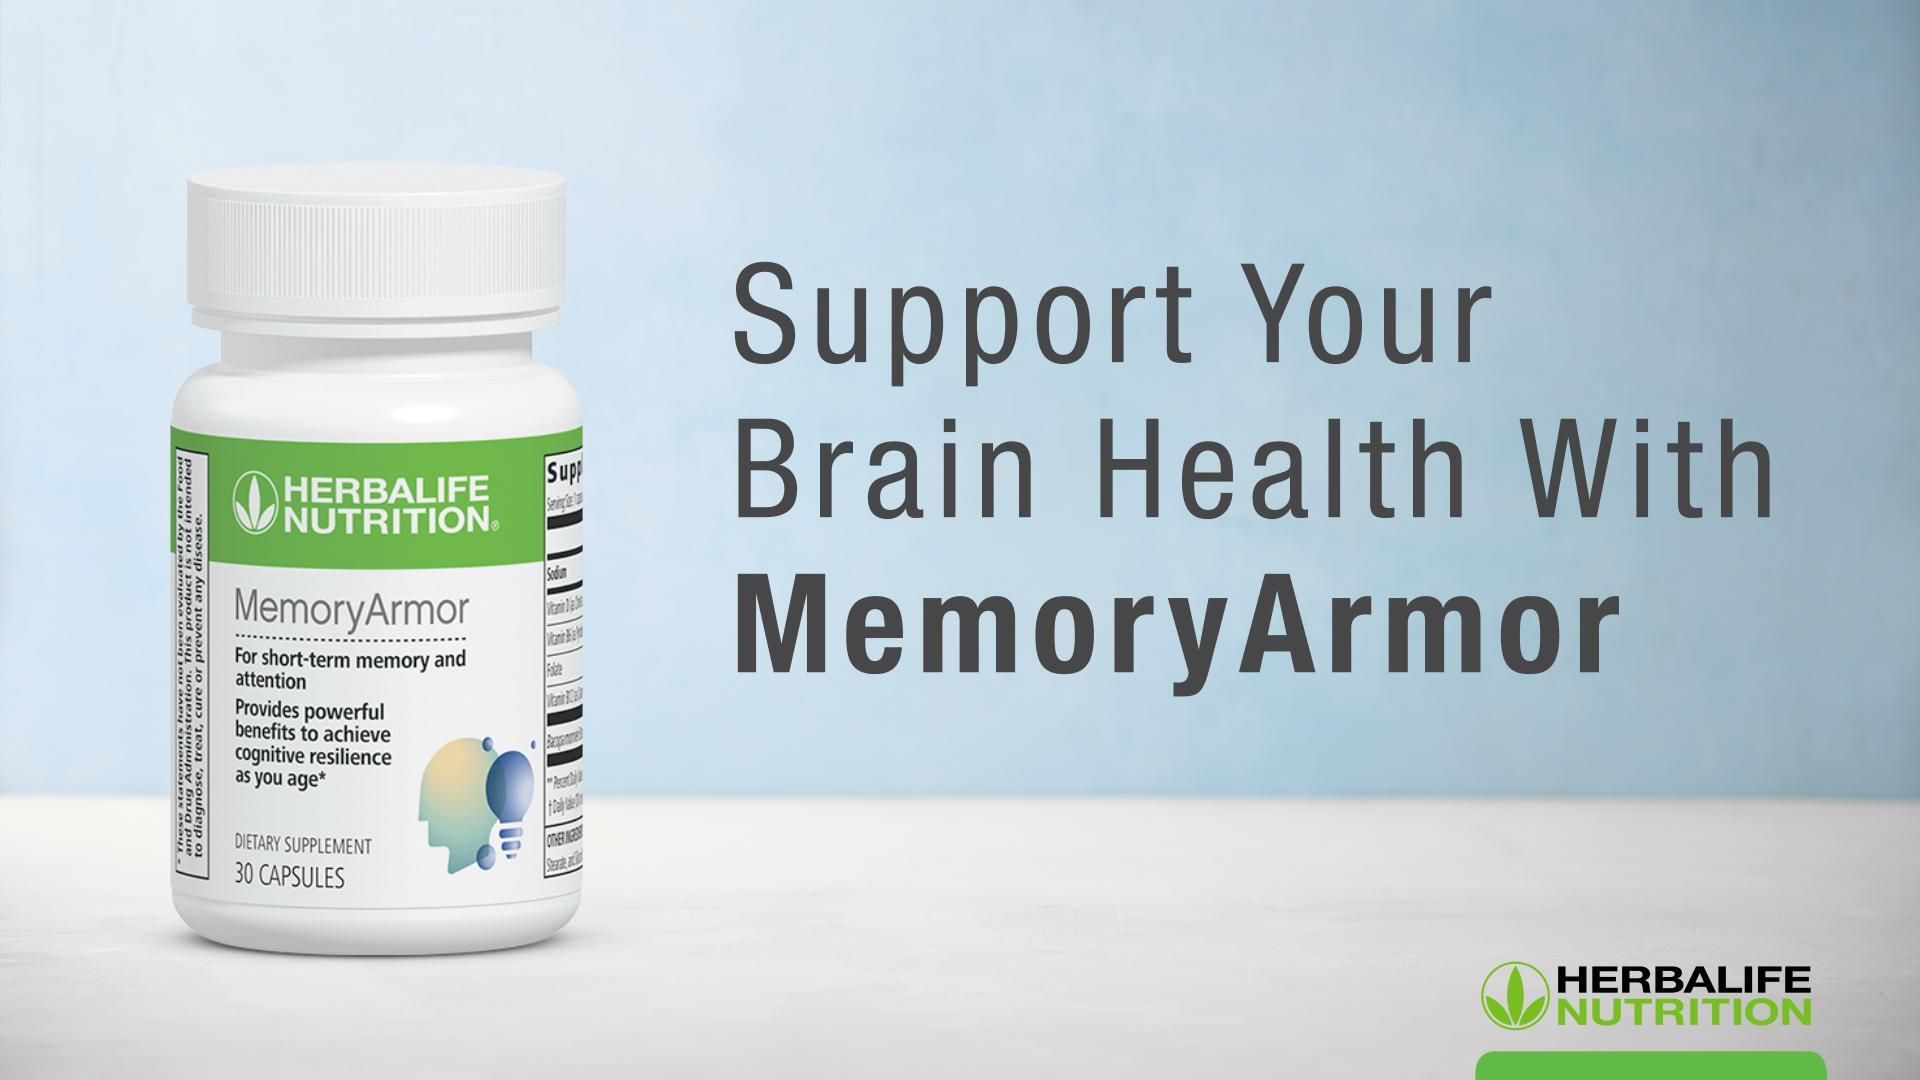 MemoryArmor: Know the Products